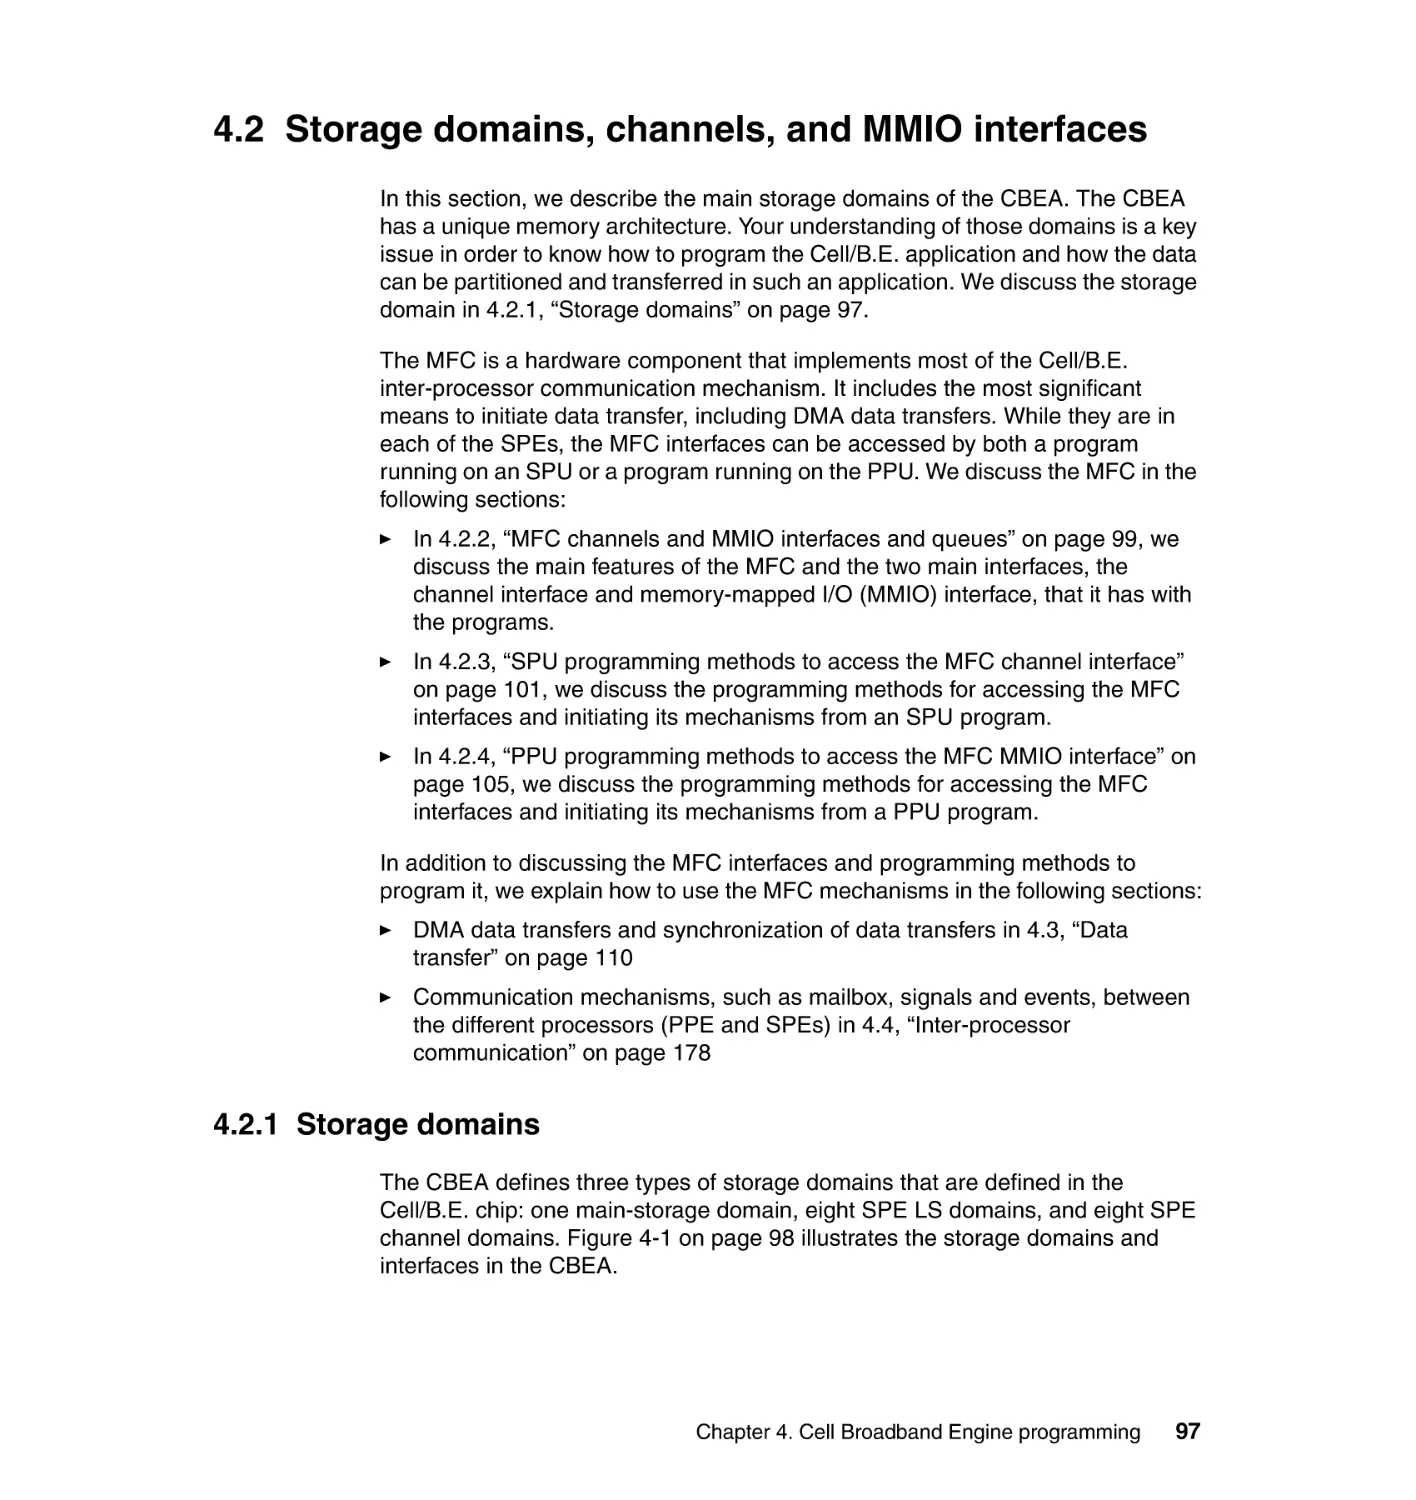 4.2 Storage domains, channels, and MMIO interfaces
4.2.1 Storage domains